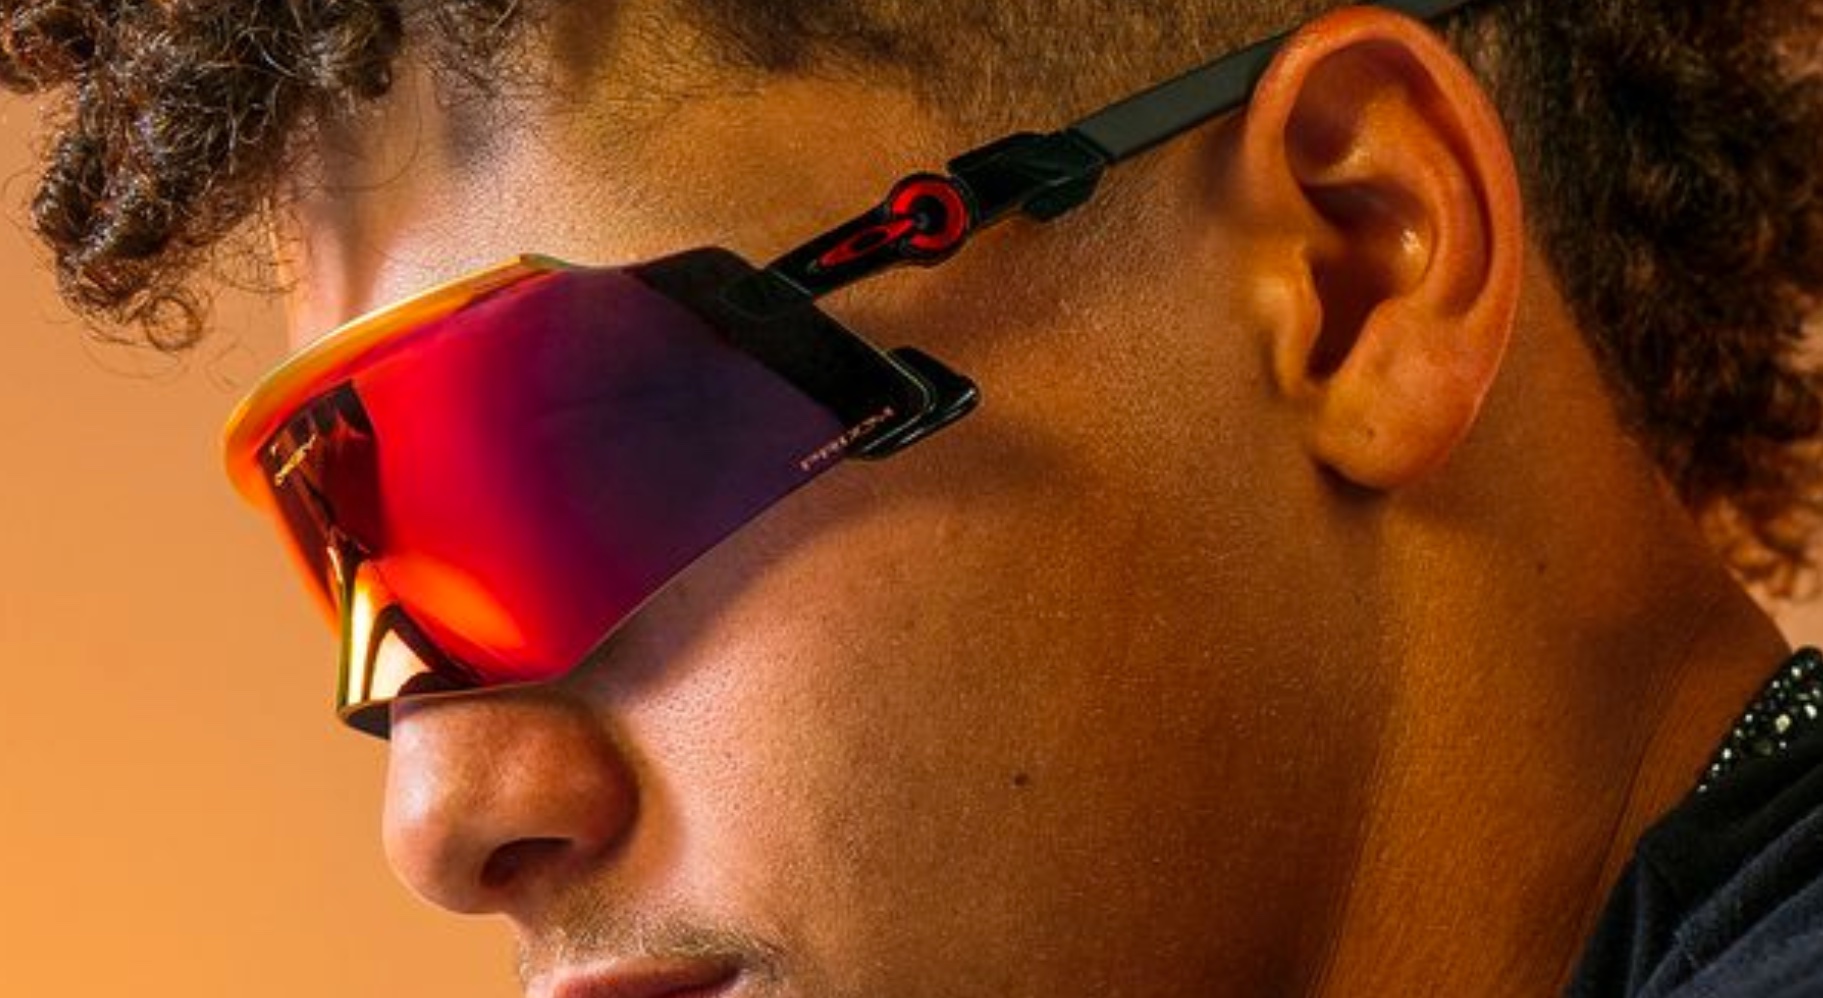 Oakley drops new 'Kato' sunglasses this summer that are made for sports